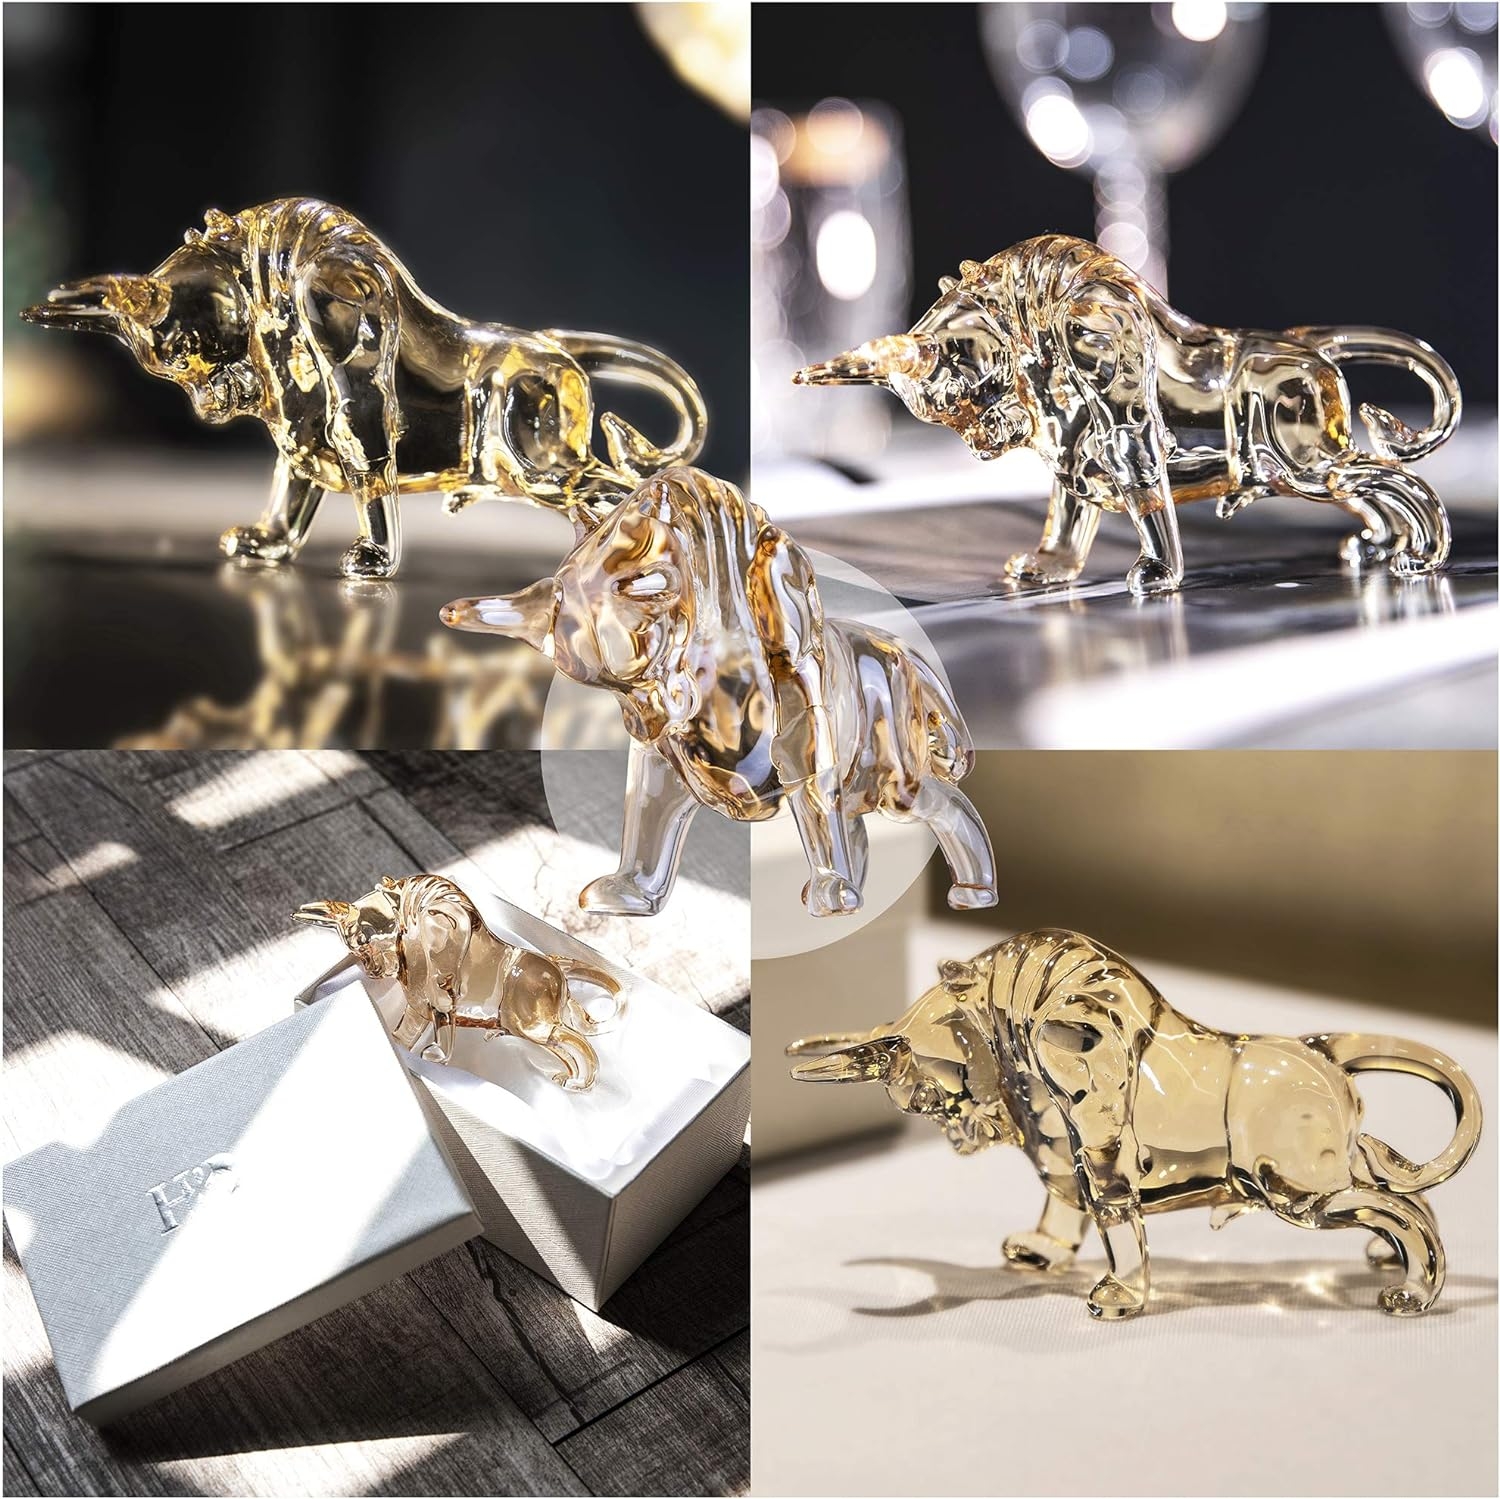 H&D HYALINE & DORA Charm and Lucky FengShui Crystal Statues Wall Street Bull Figurine Sculpture Home Office Desk Decorative Ornament